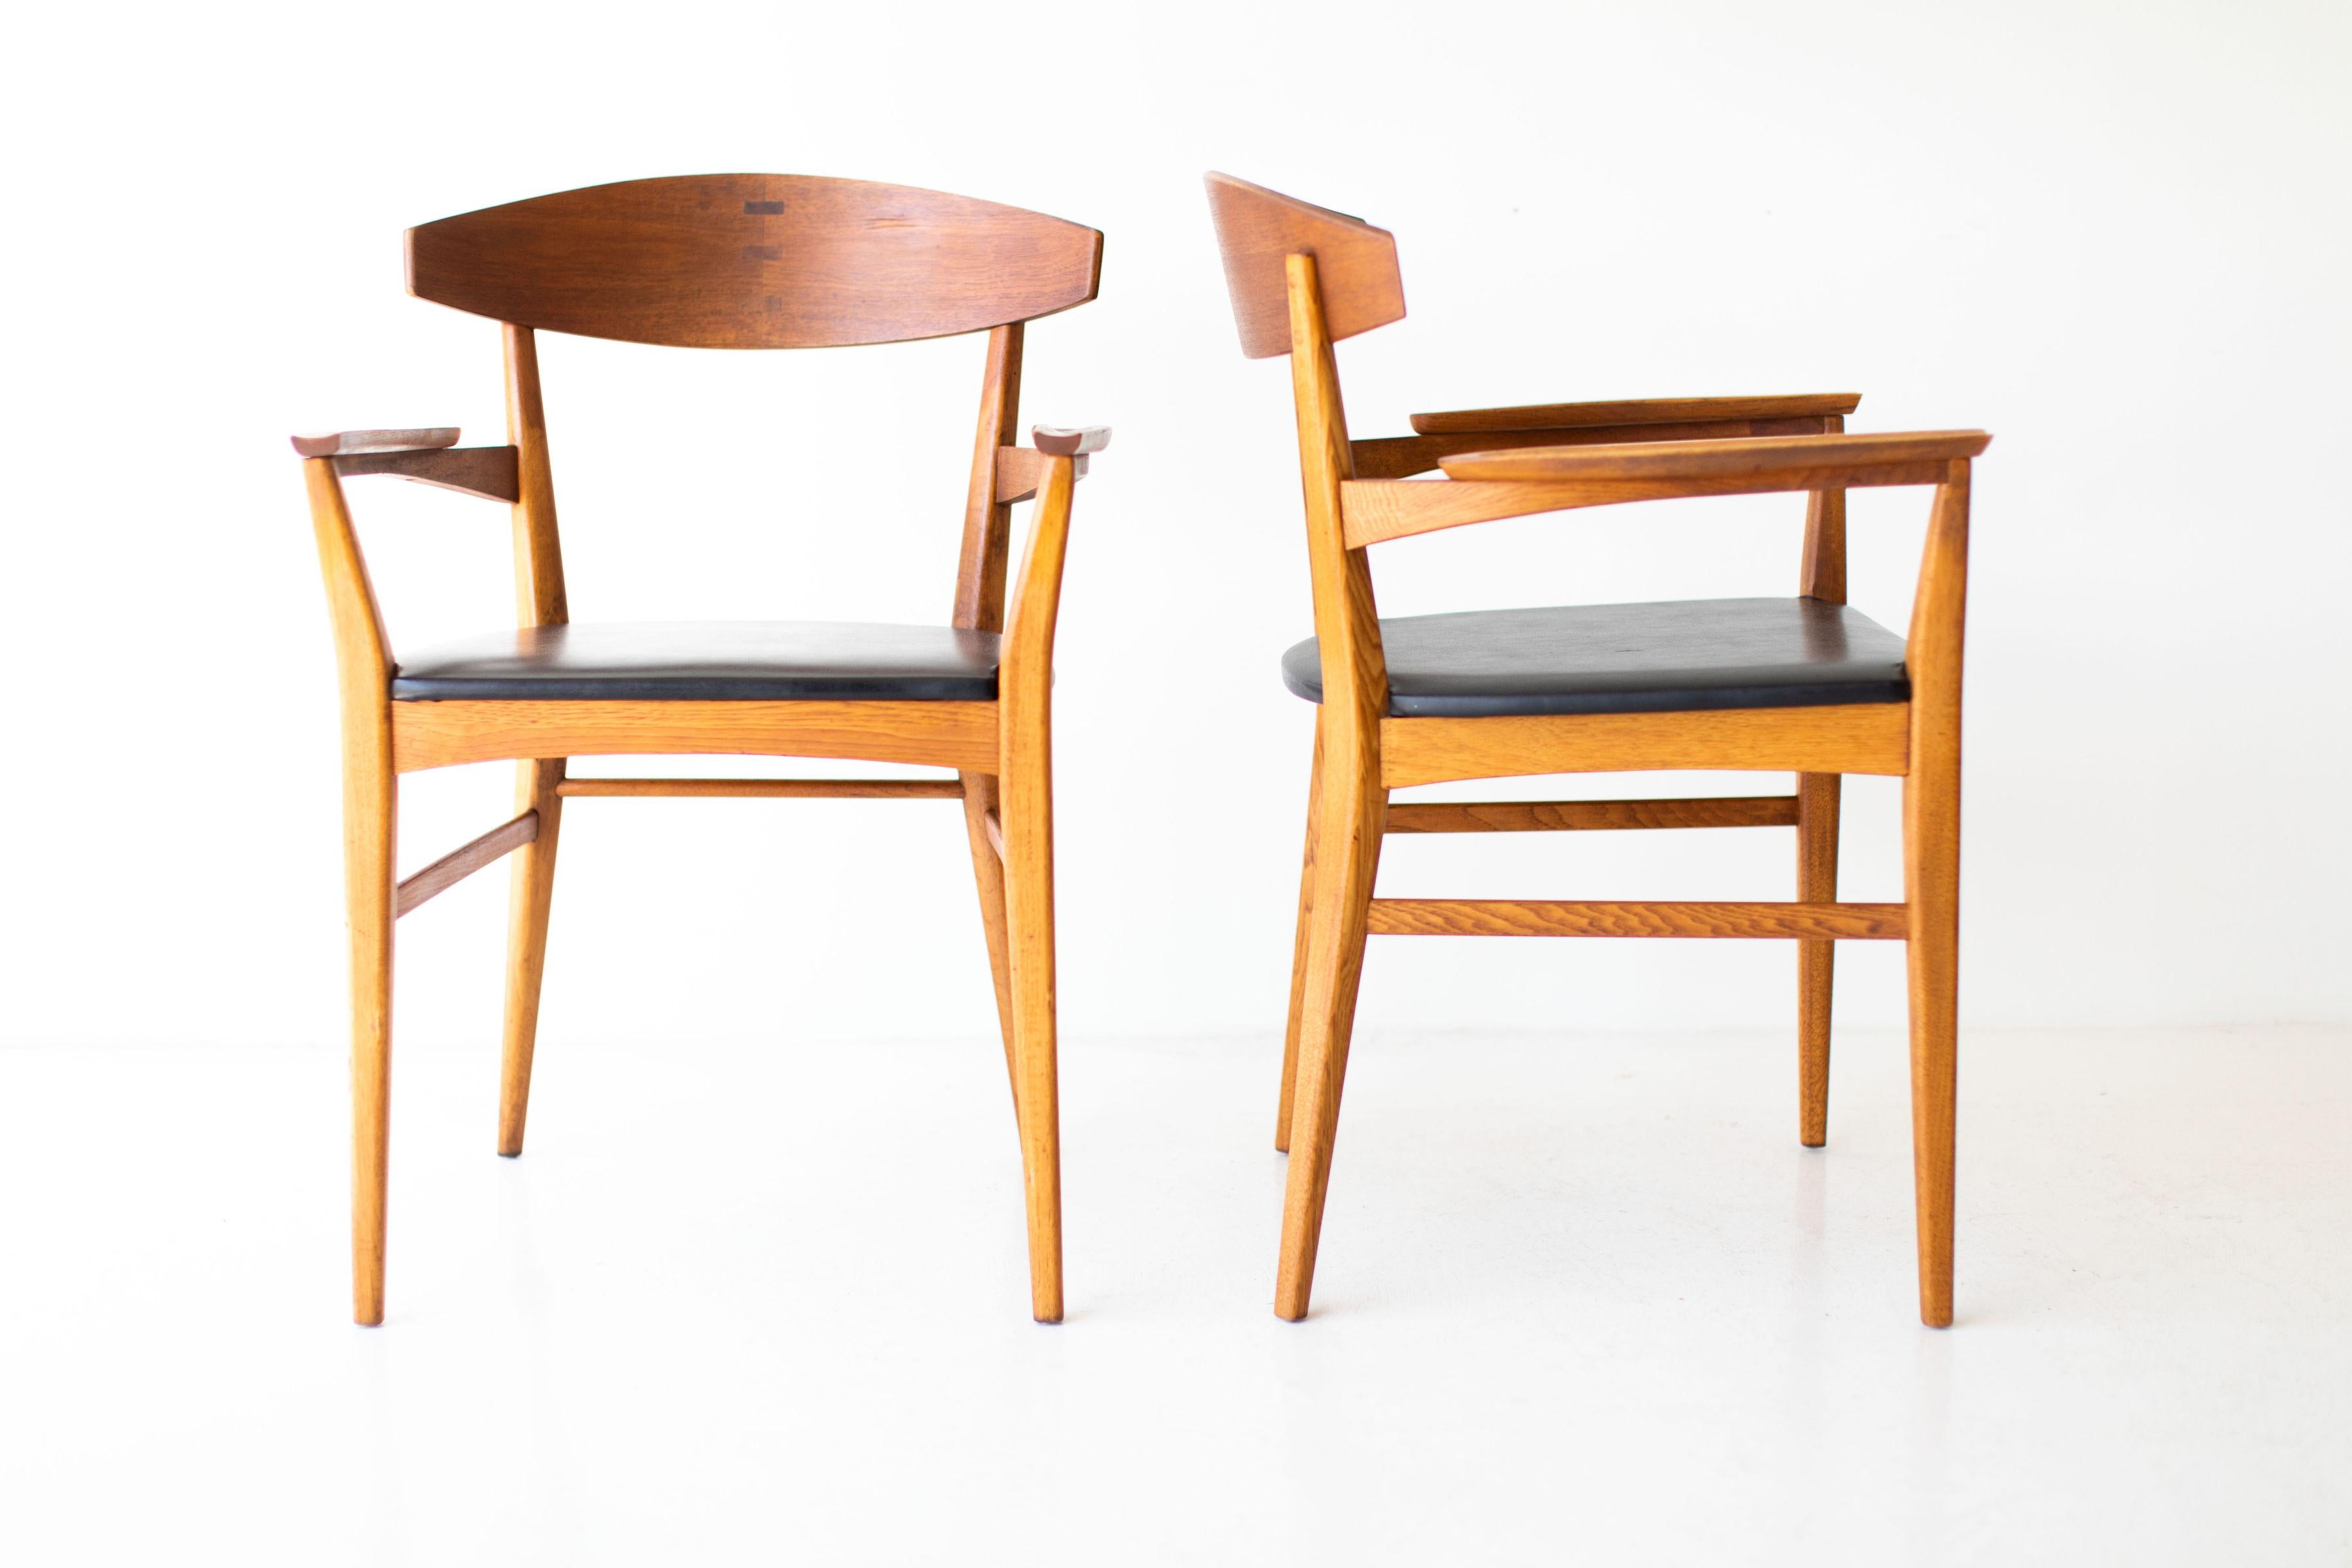 Designer: Paul McCobb.

Manufacturer: Lane
Period/Model: Mid-Century Modern.
Specs: Wood, vinyl.

Condition:

These Paul McCobb dining chairs for Lane's components line are vintage condition. The wood shows imperfections with age with